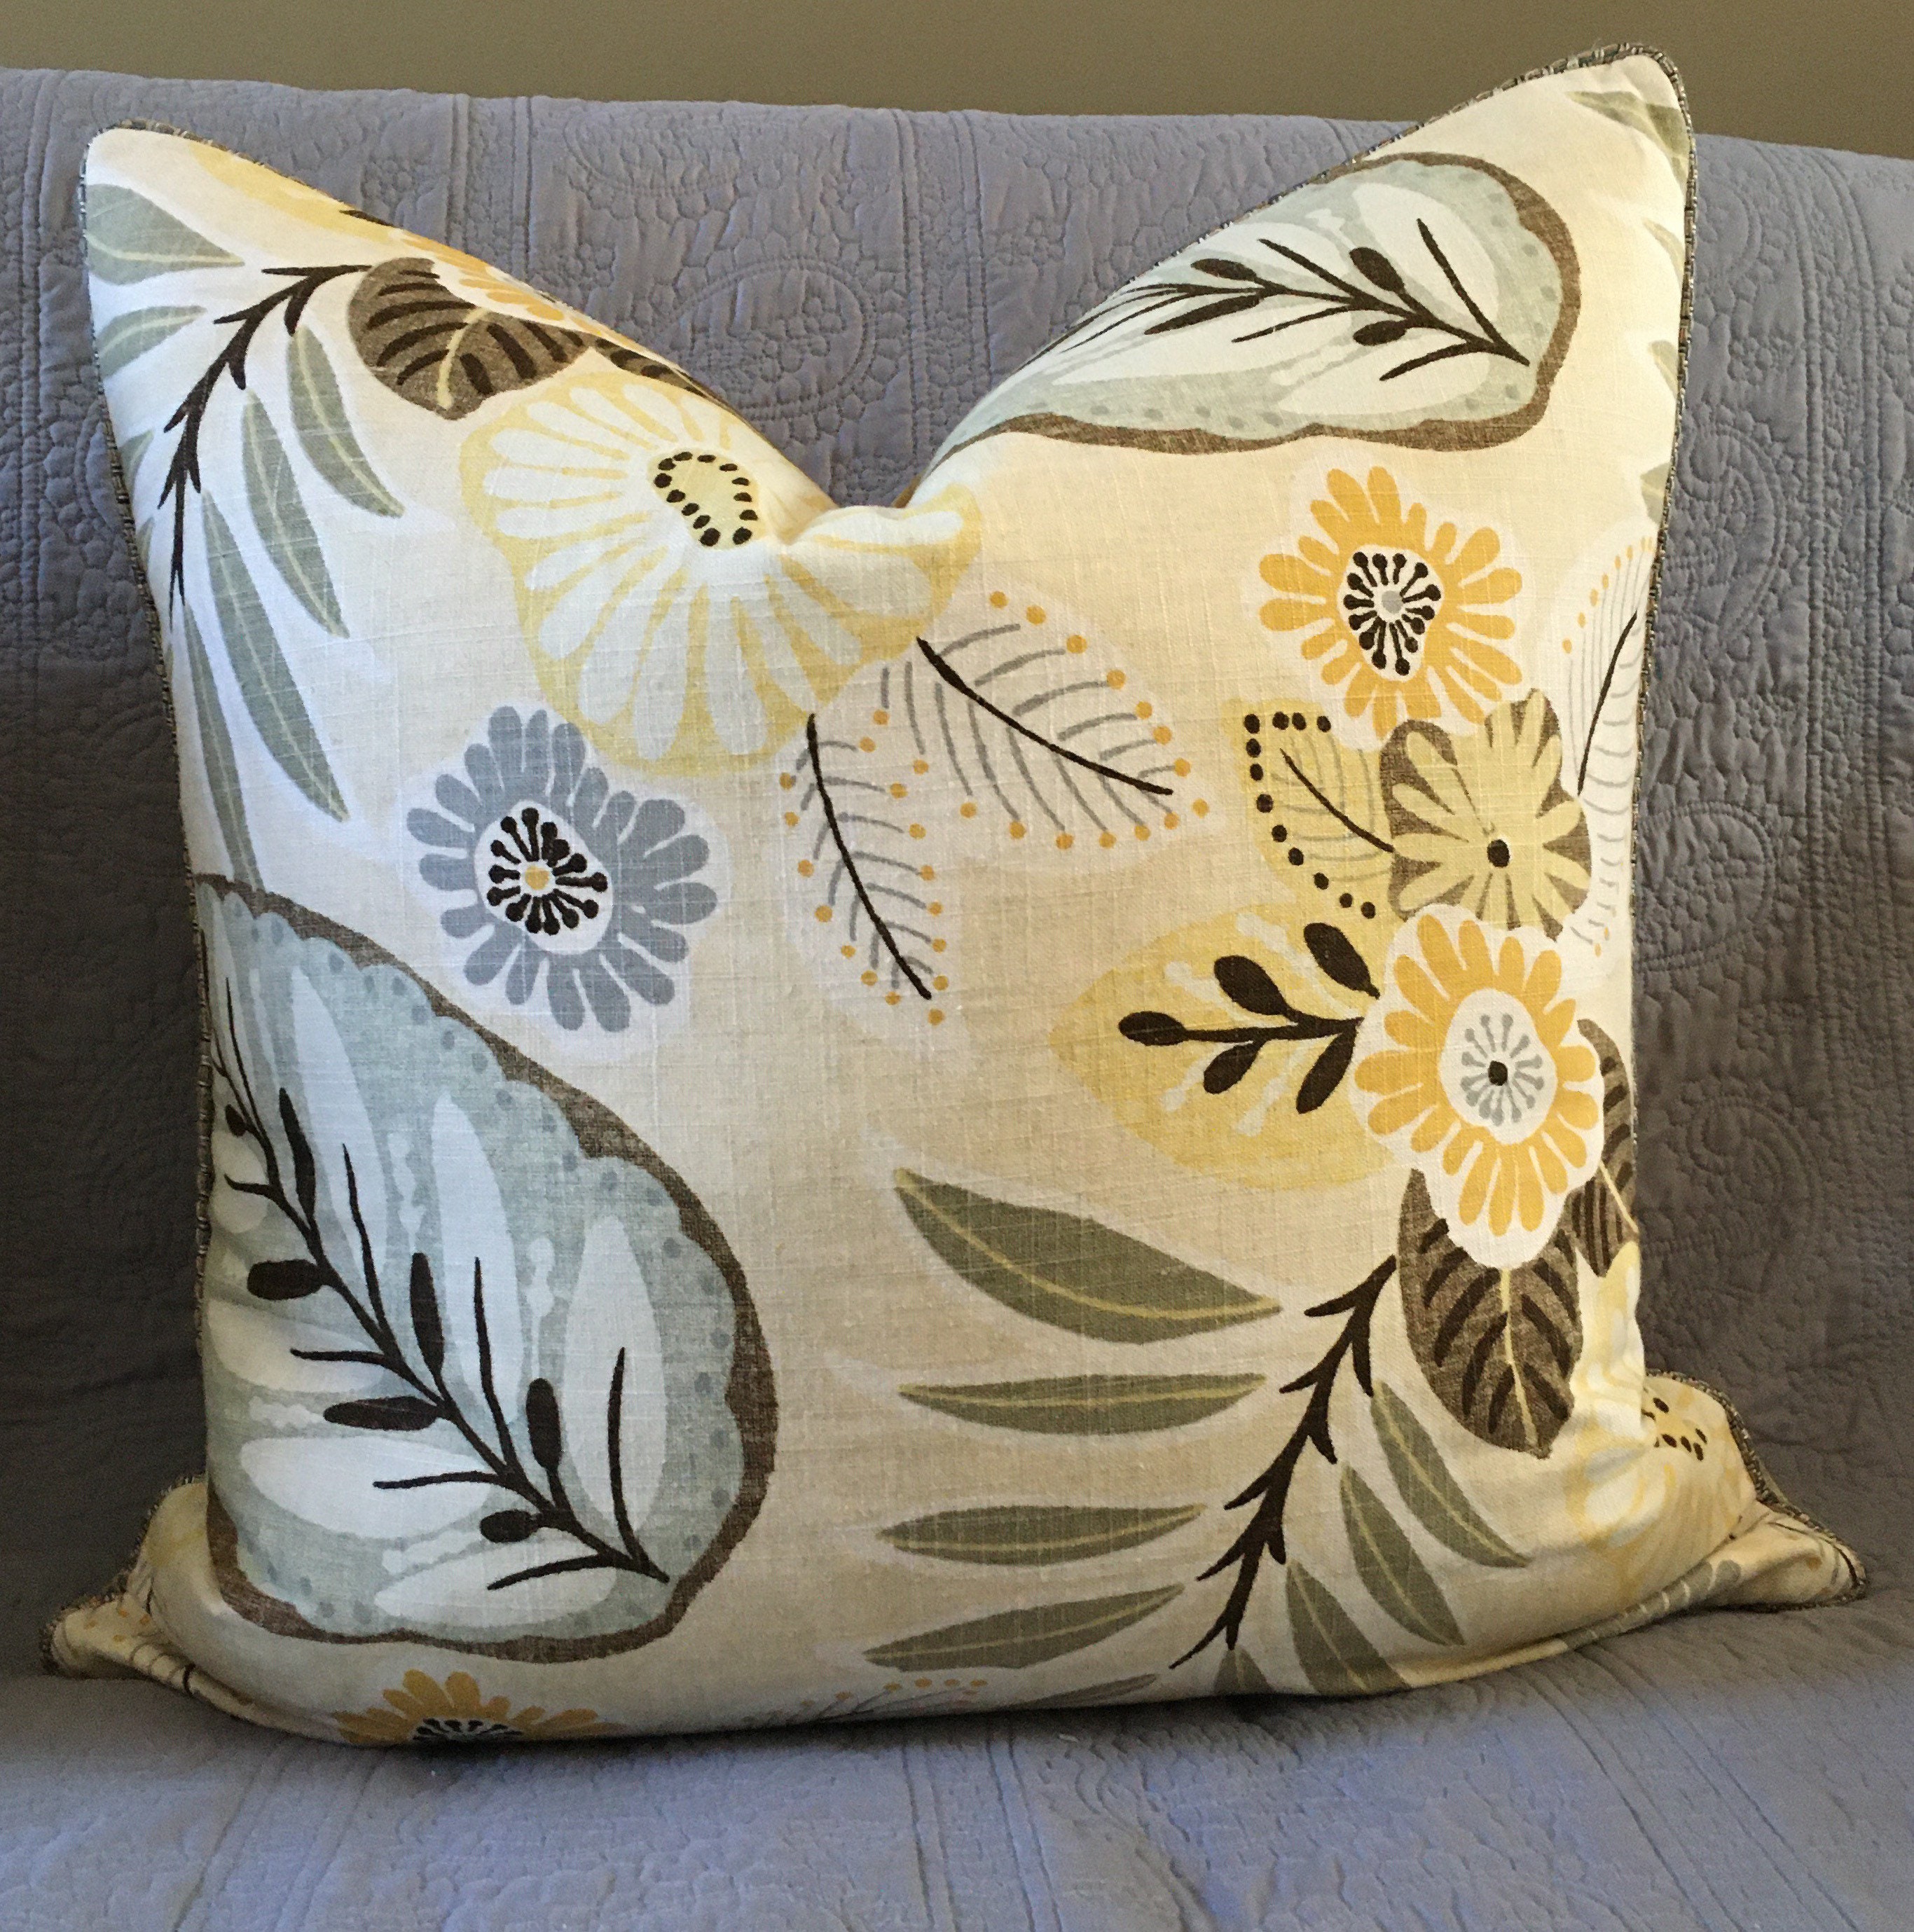 Decorative Pillow in Macbeth Heather Gray Floral